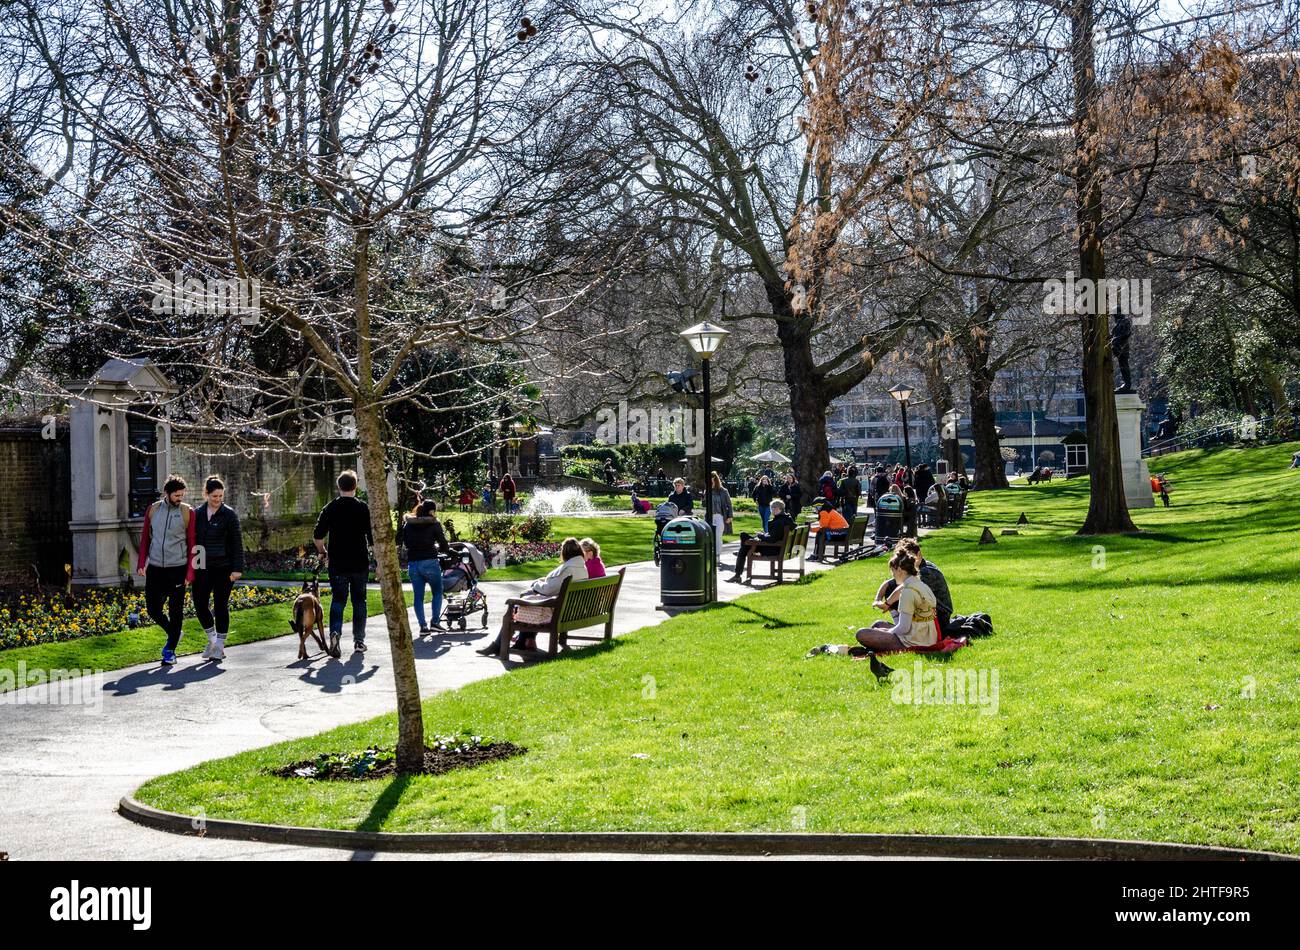 London Memorial Gardens busy with people walking and sat on benches along the main path through the park. Stock Photo